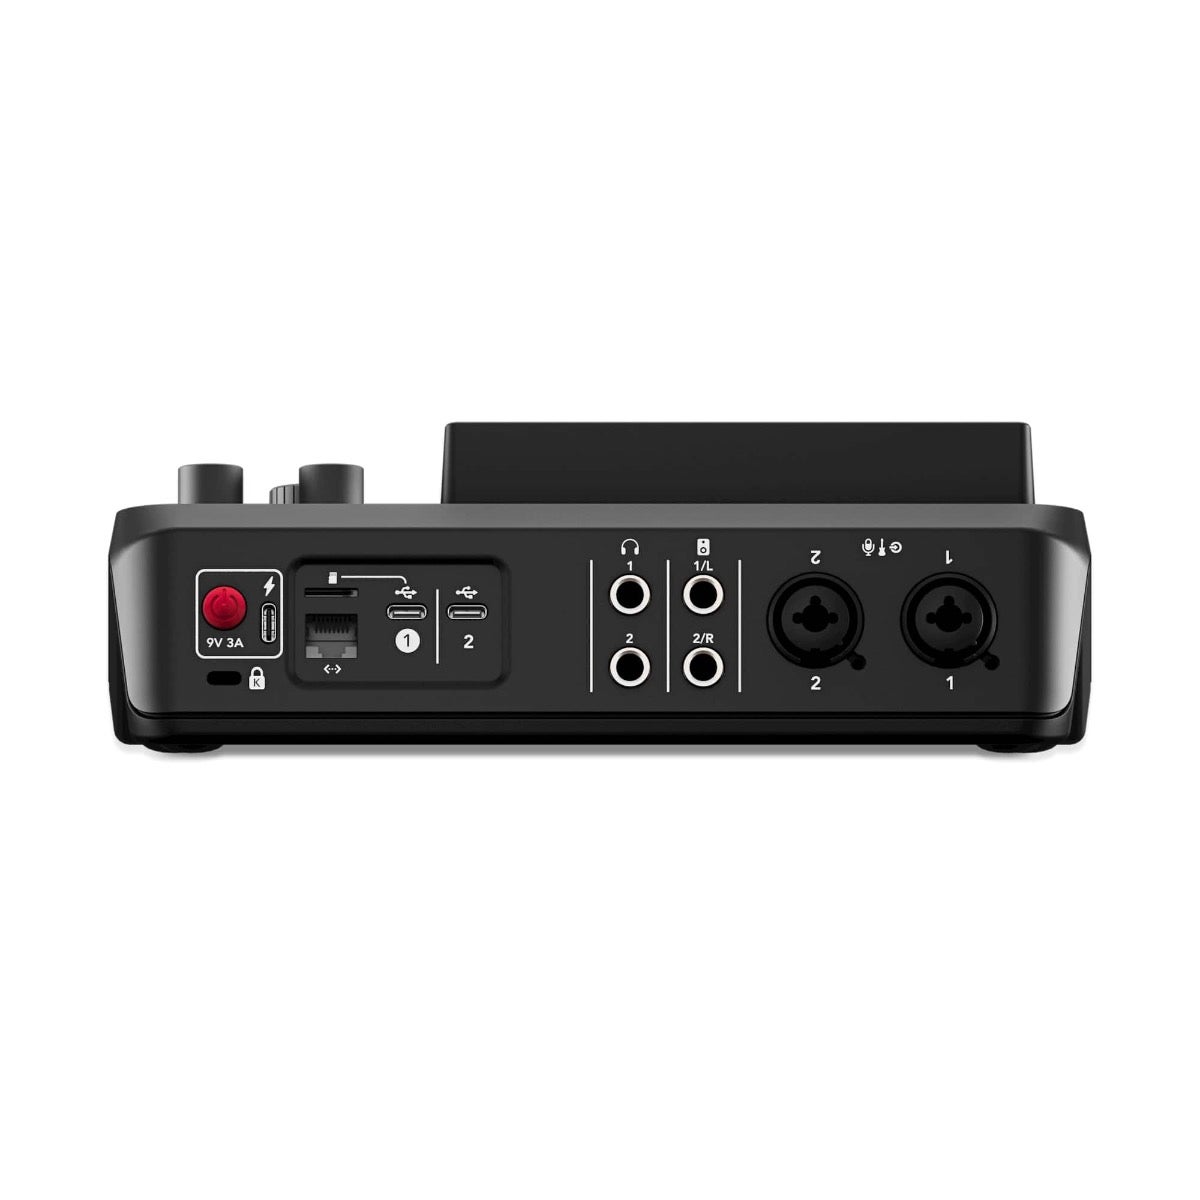 Røde Rødecaster Duo all-in-one podcaster-mixer